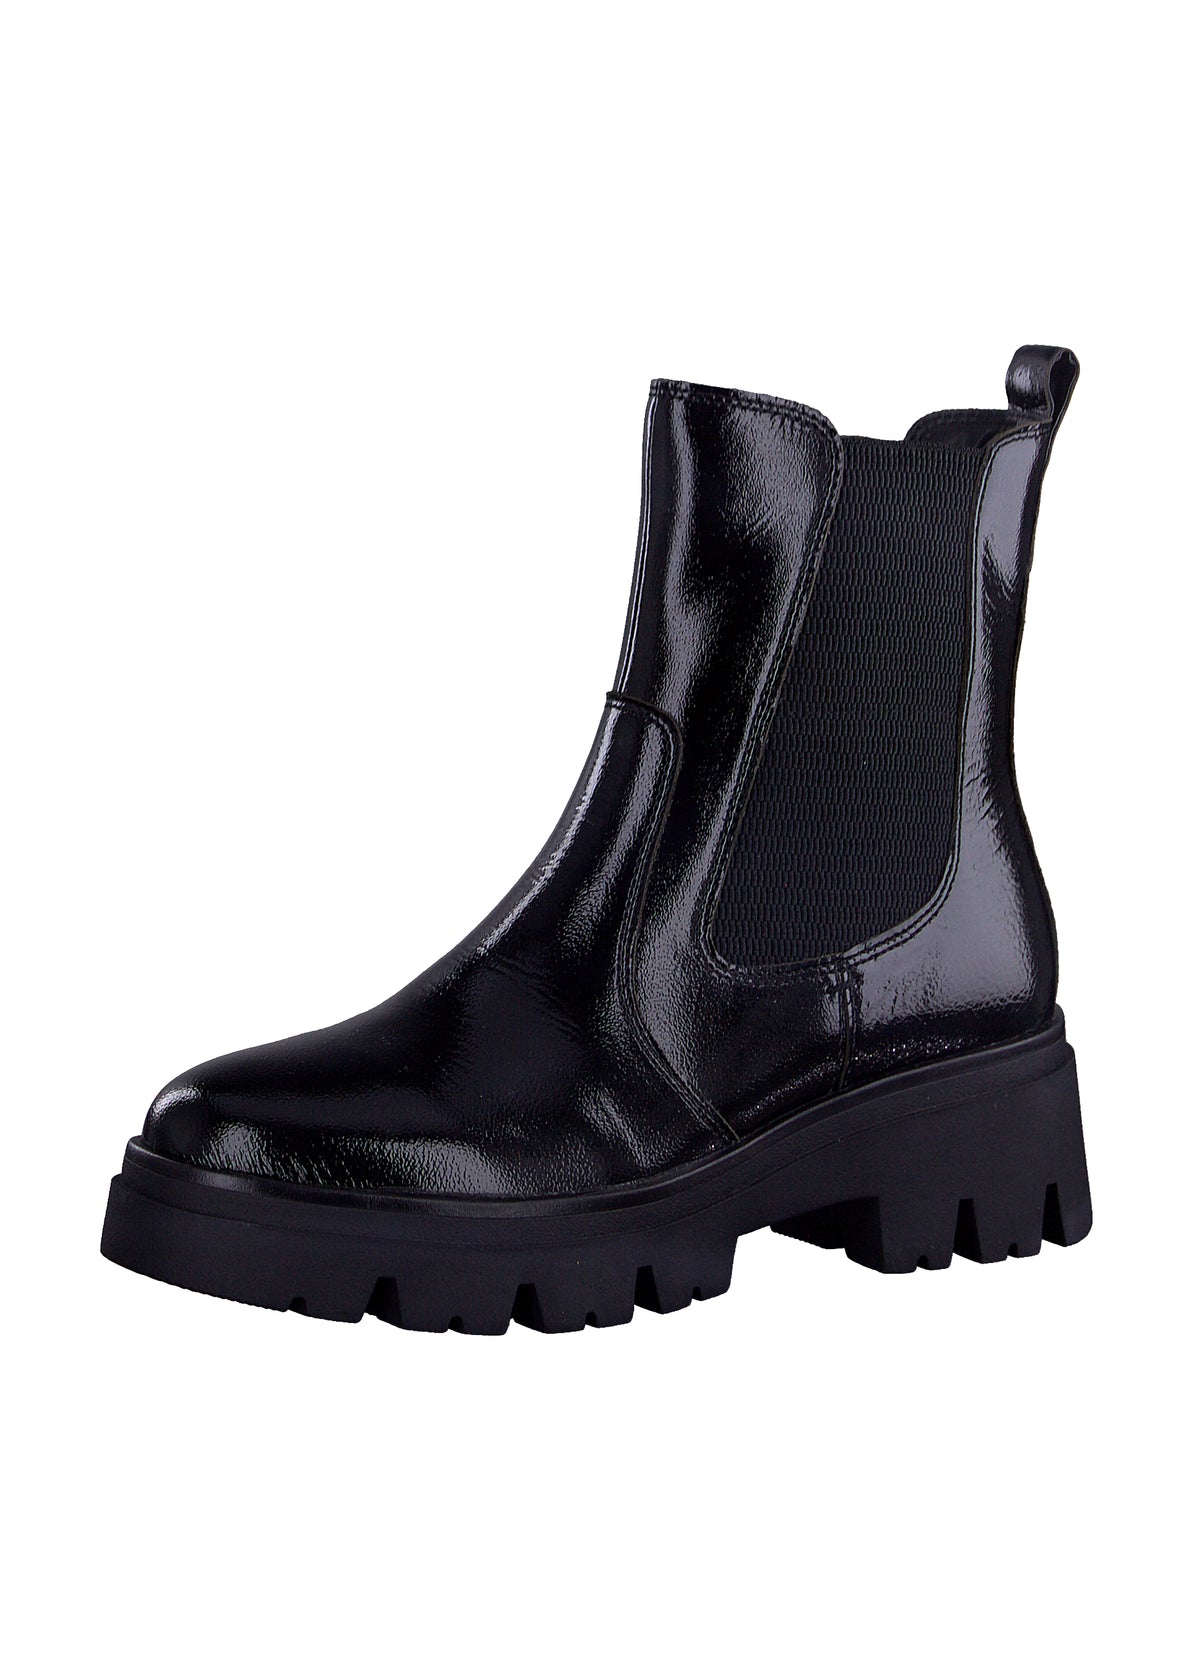 Chelsea ankle boots with a thick sole - black patent leather